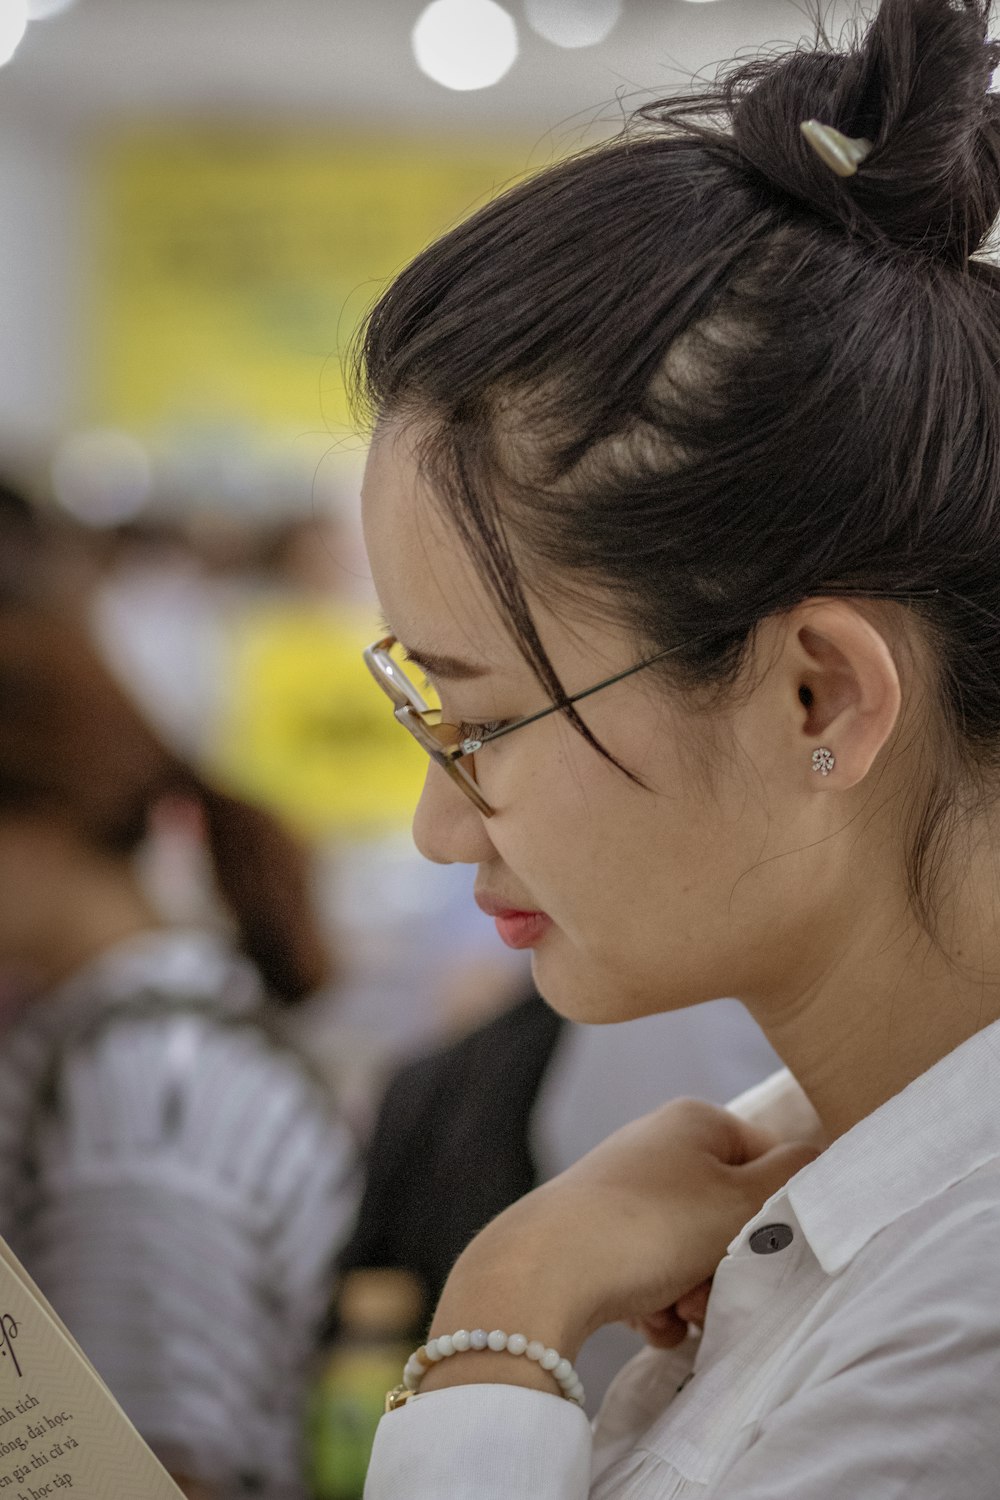 woman wearing white top and eyeglasses